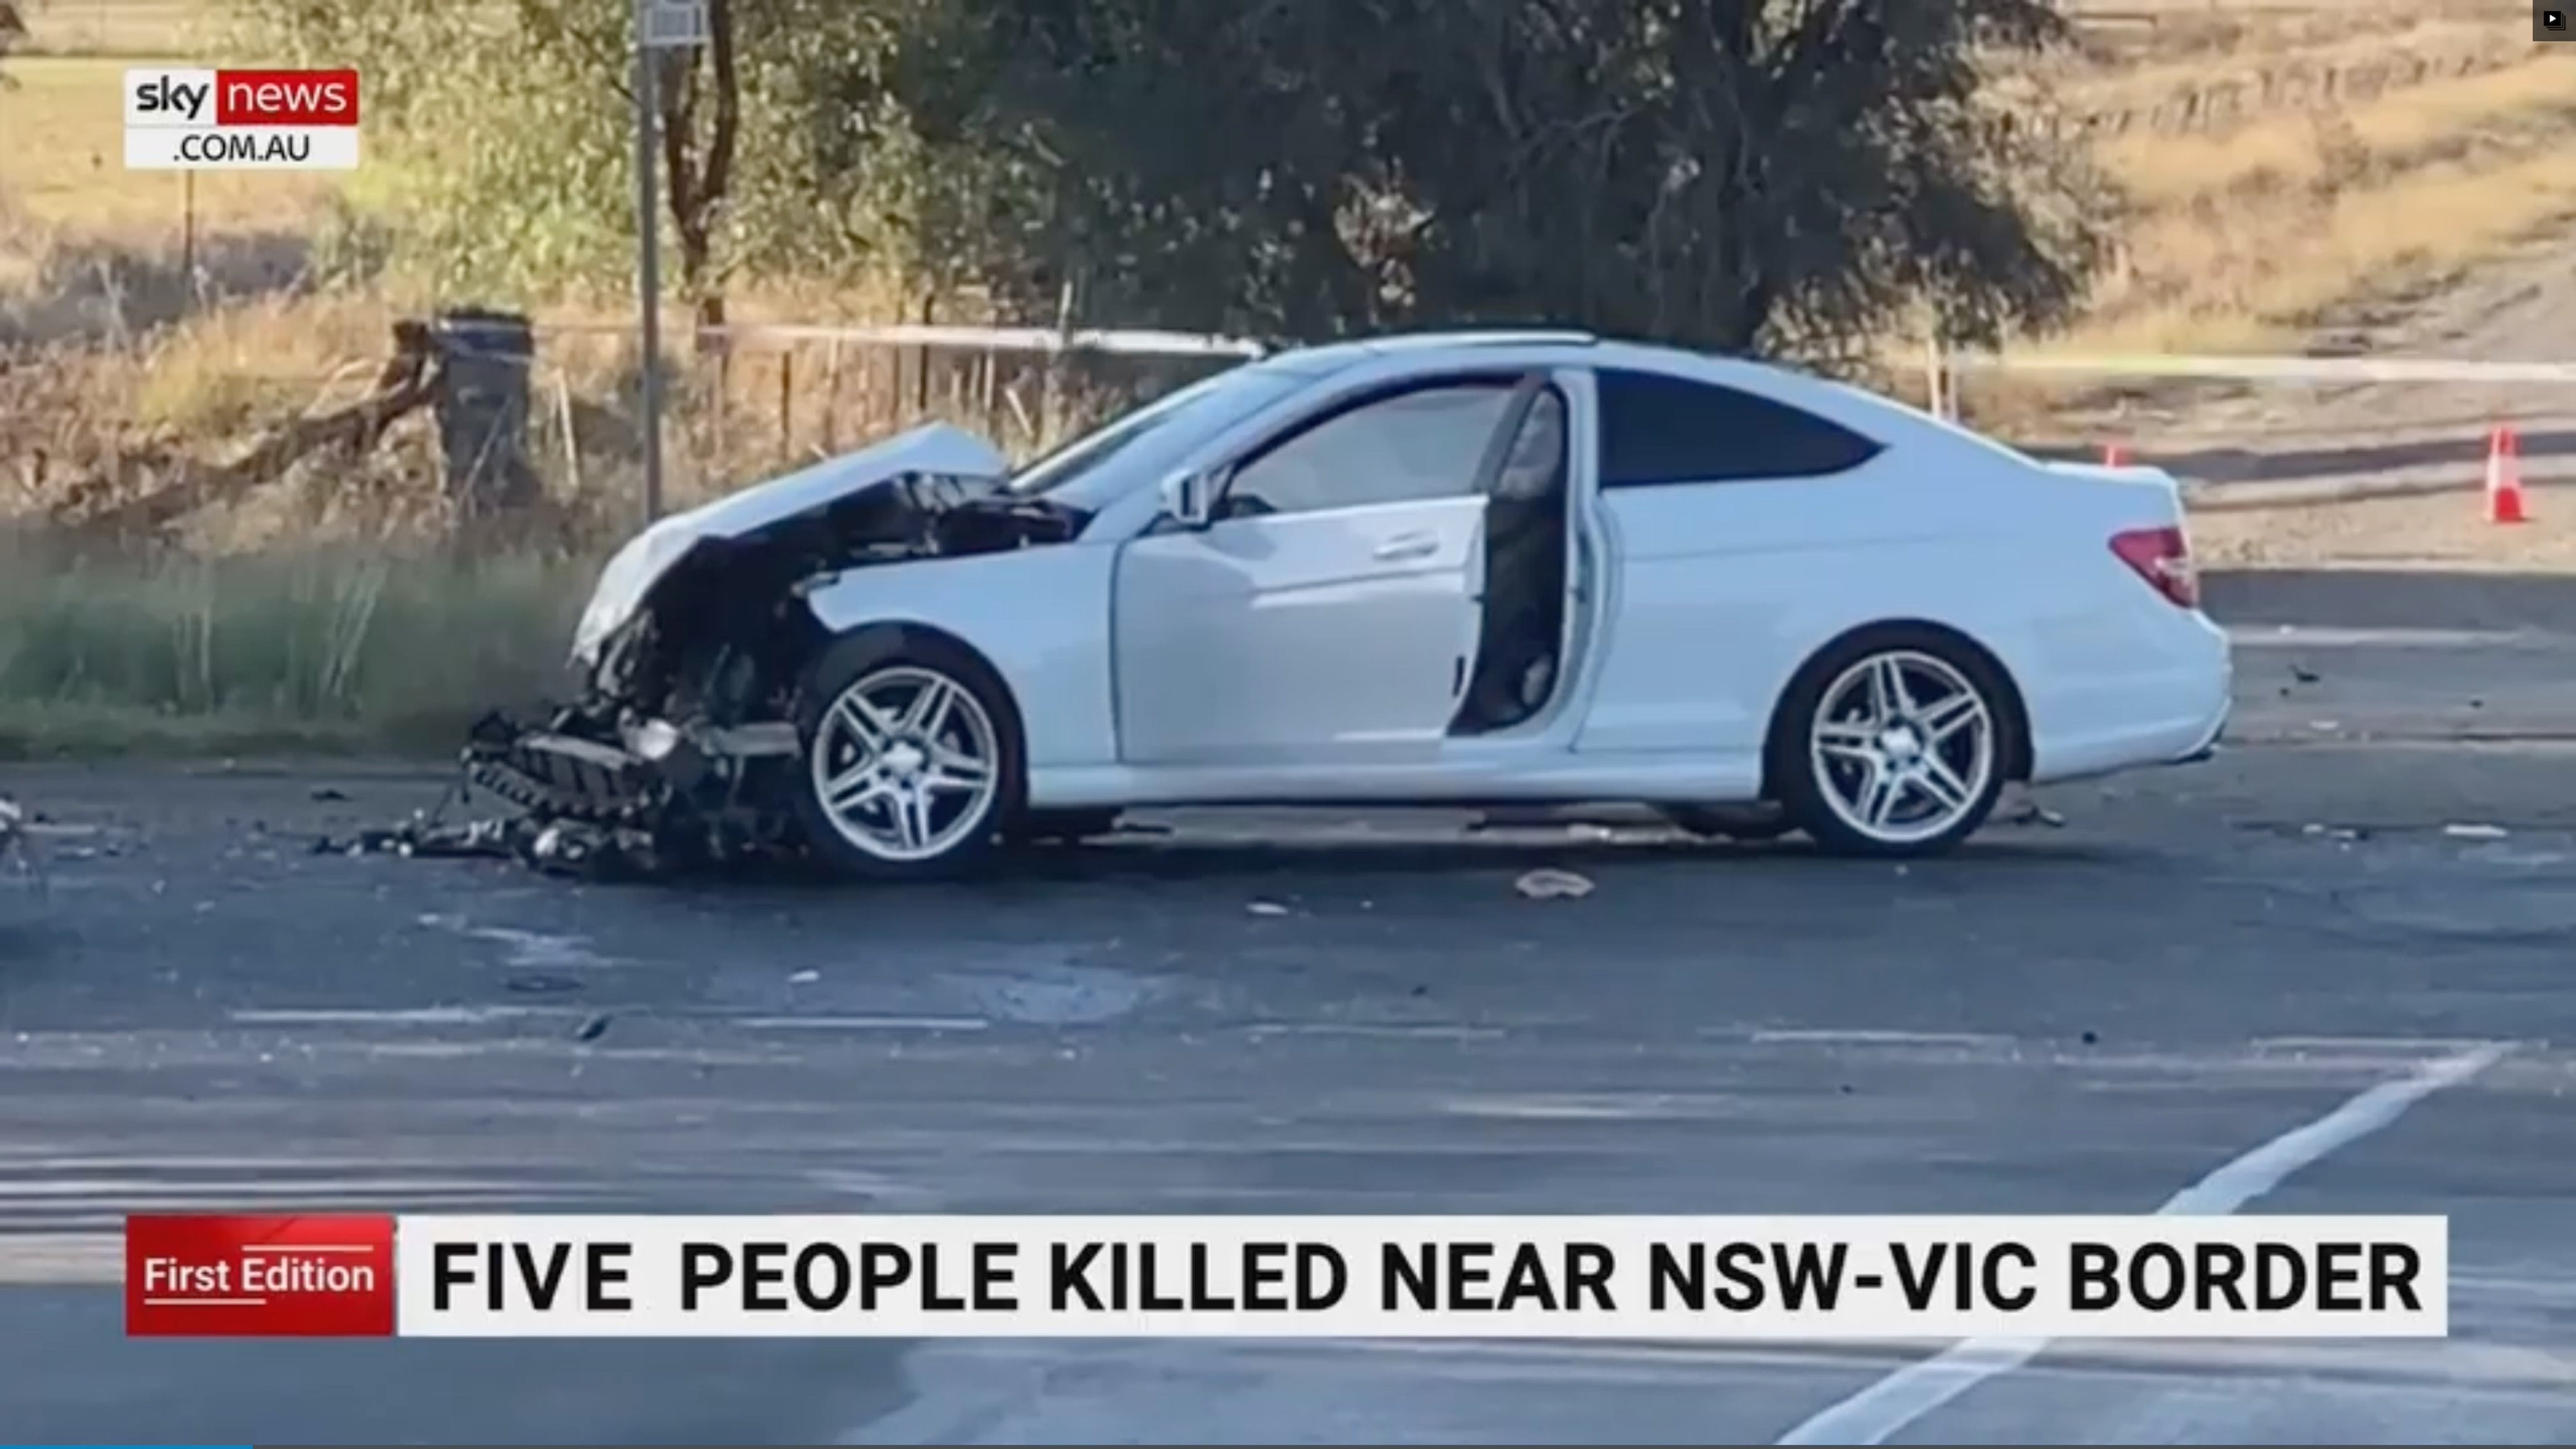 A man has been released on bail following a fatal collision which led to the deaths of five people, including a Hongkonger, in Australia. Photo: Screen capture from Sky News